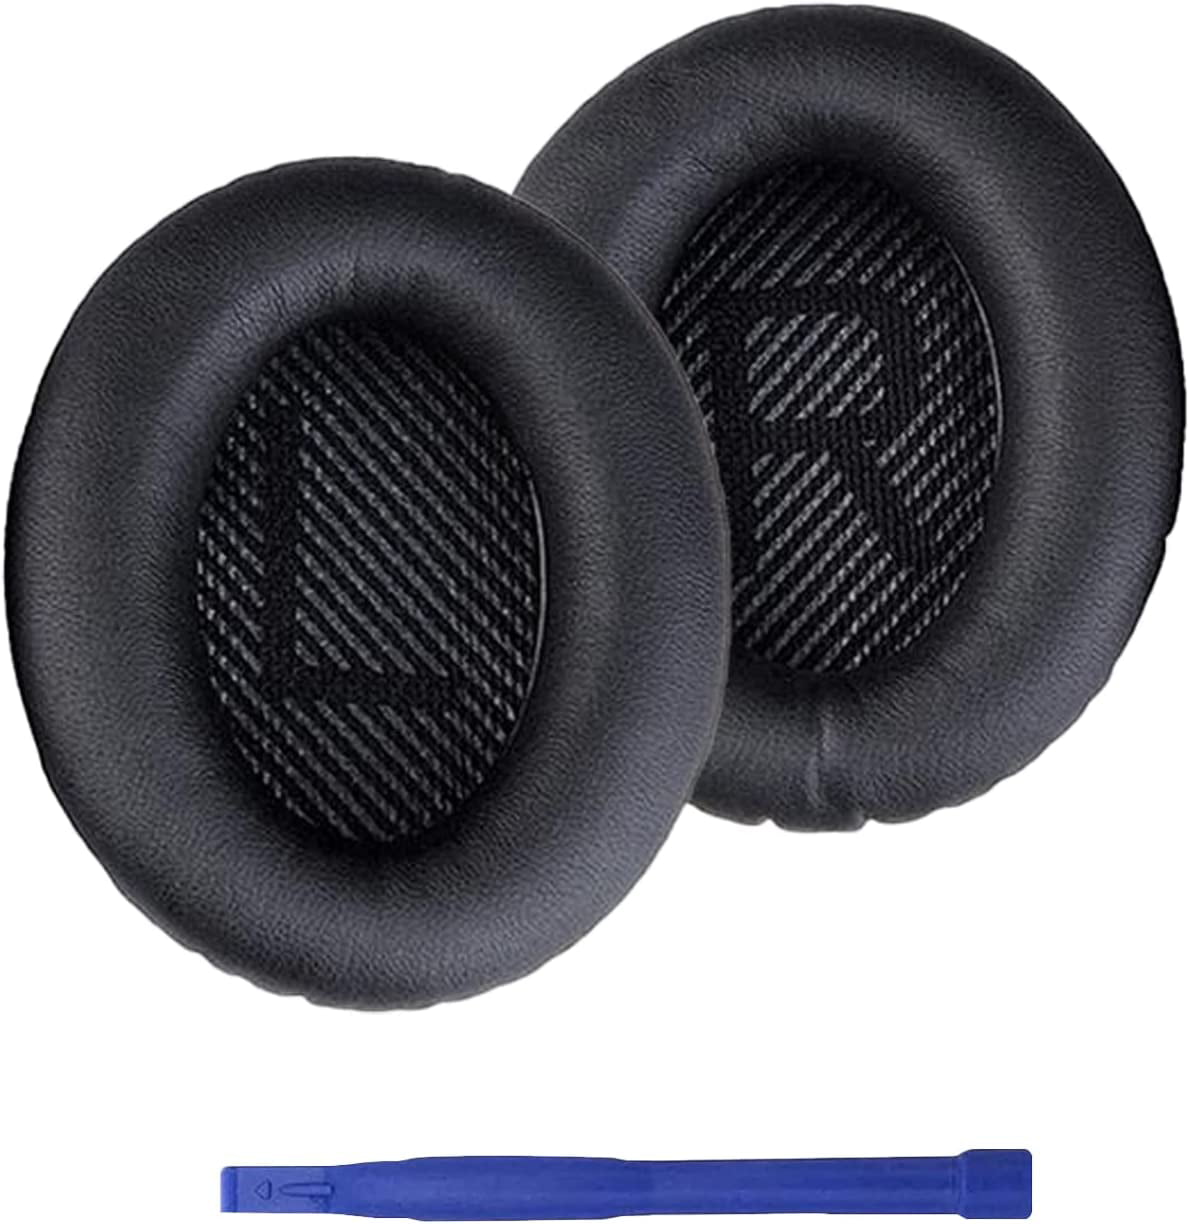 Black Replacement Ear Cushions for Boses QC Headphones